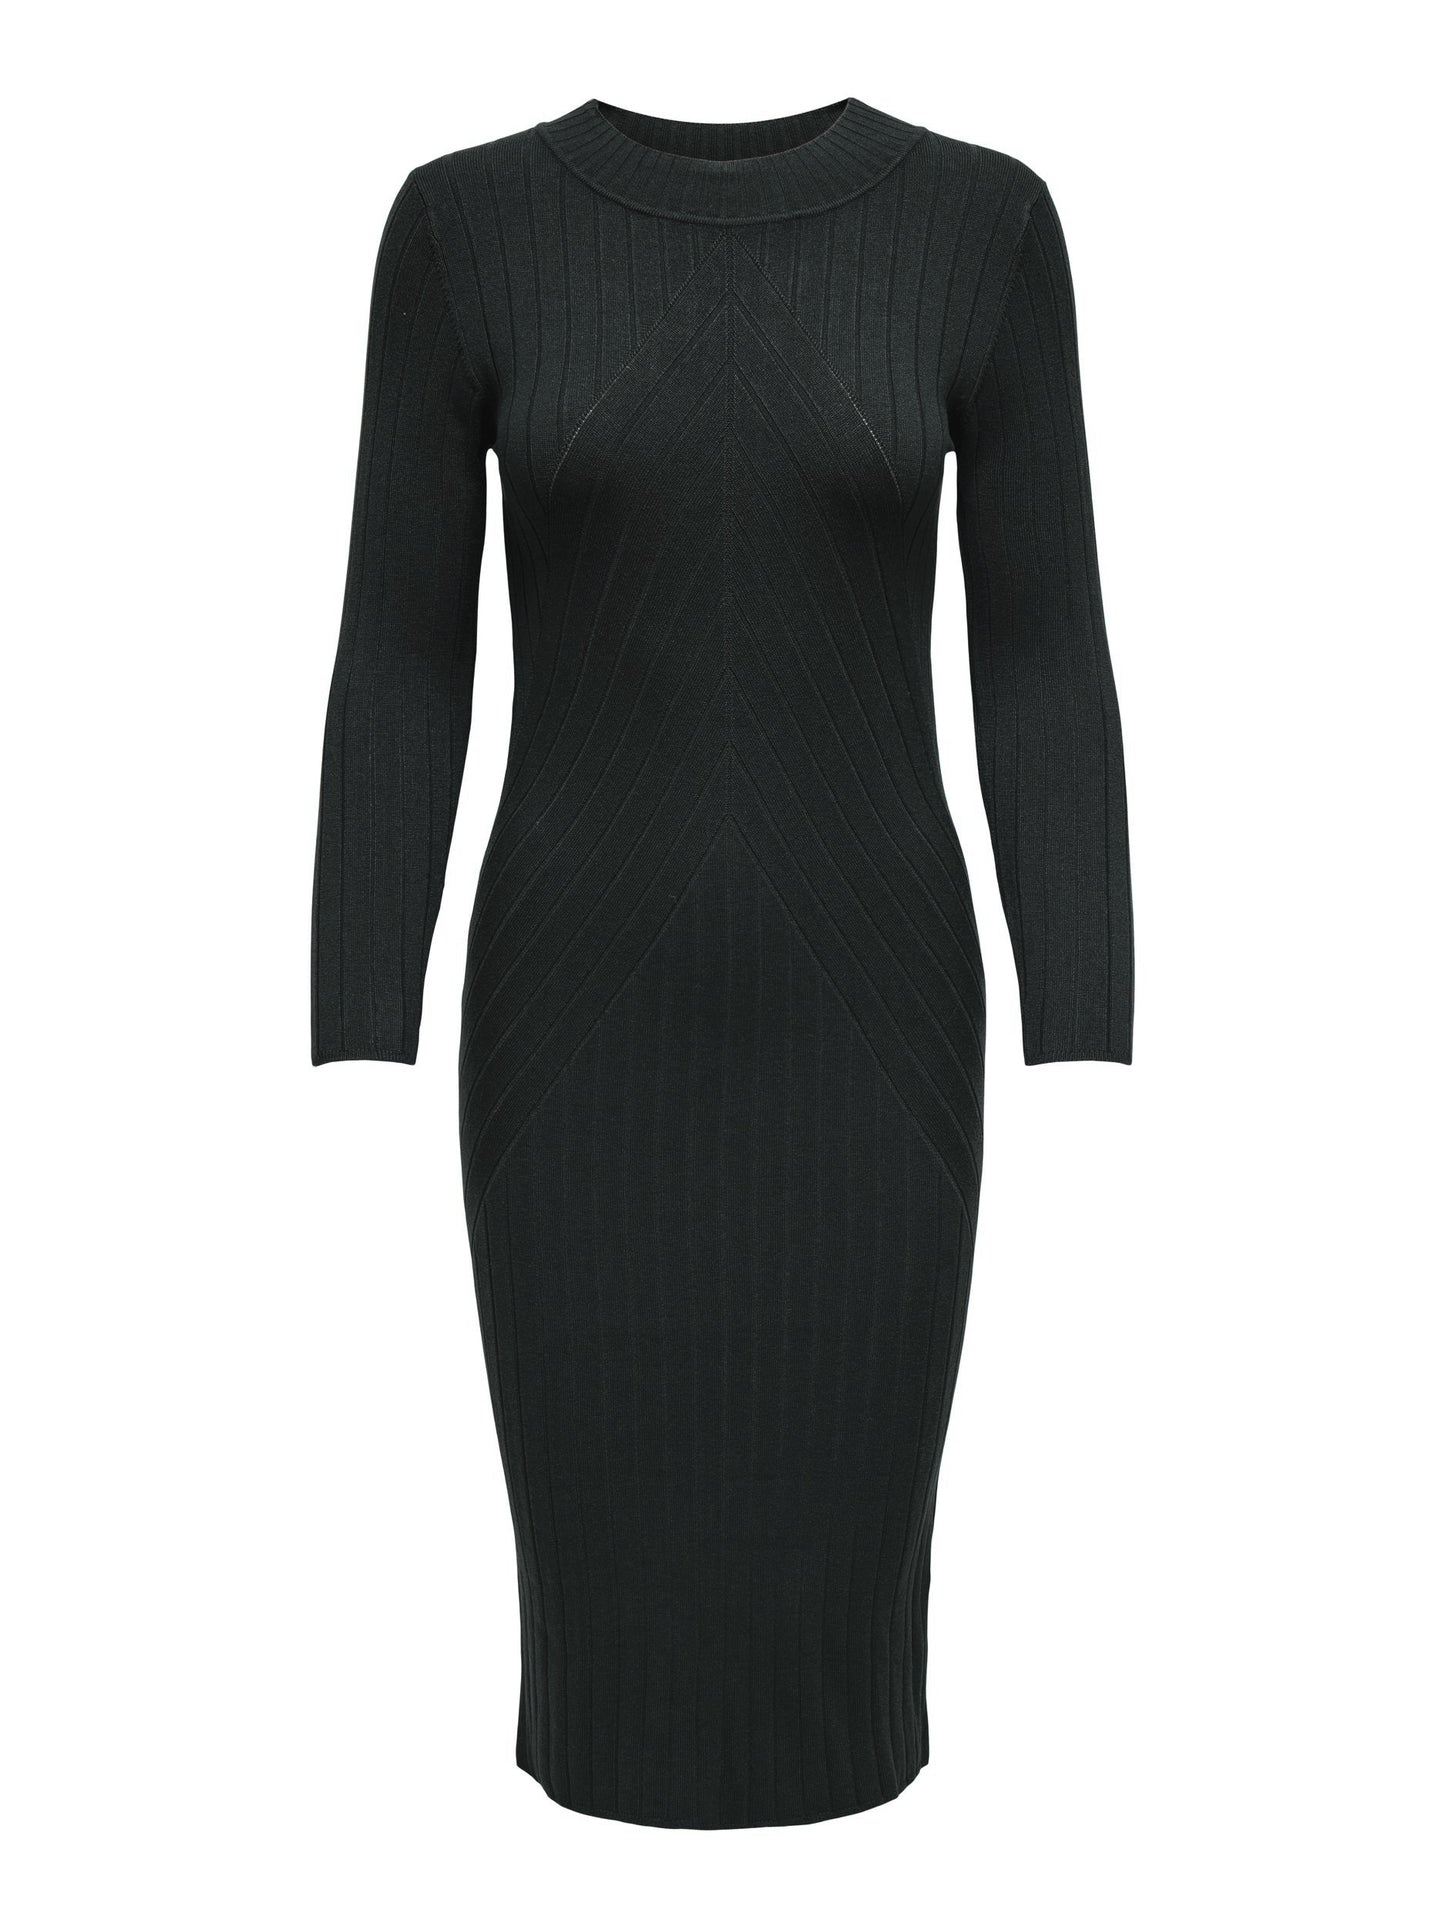 JDY Kate Ribbed Knit Round Neck Midi Dress in Black - One Nation Clothing